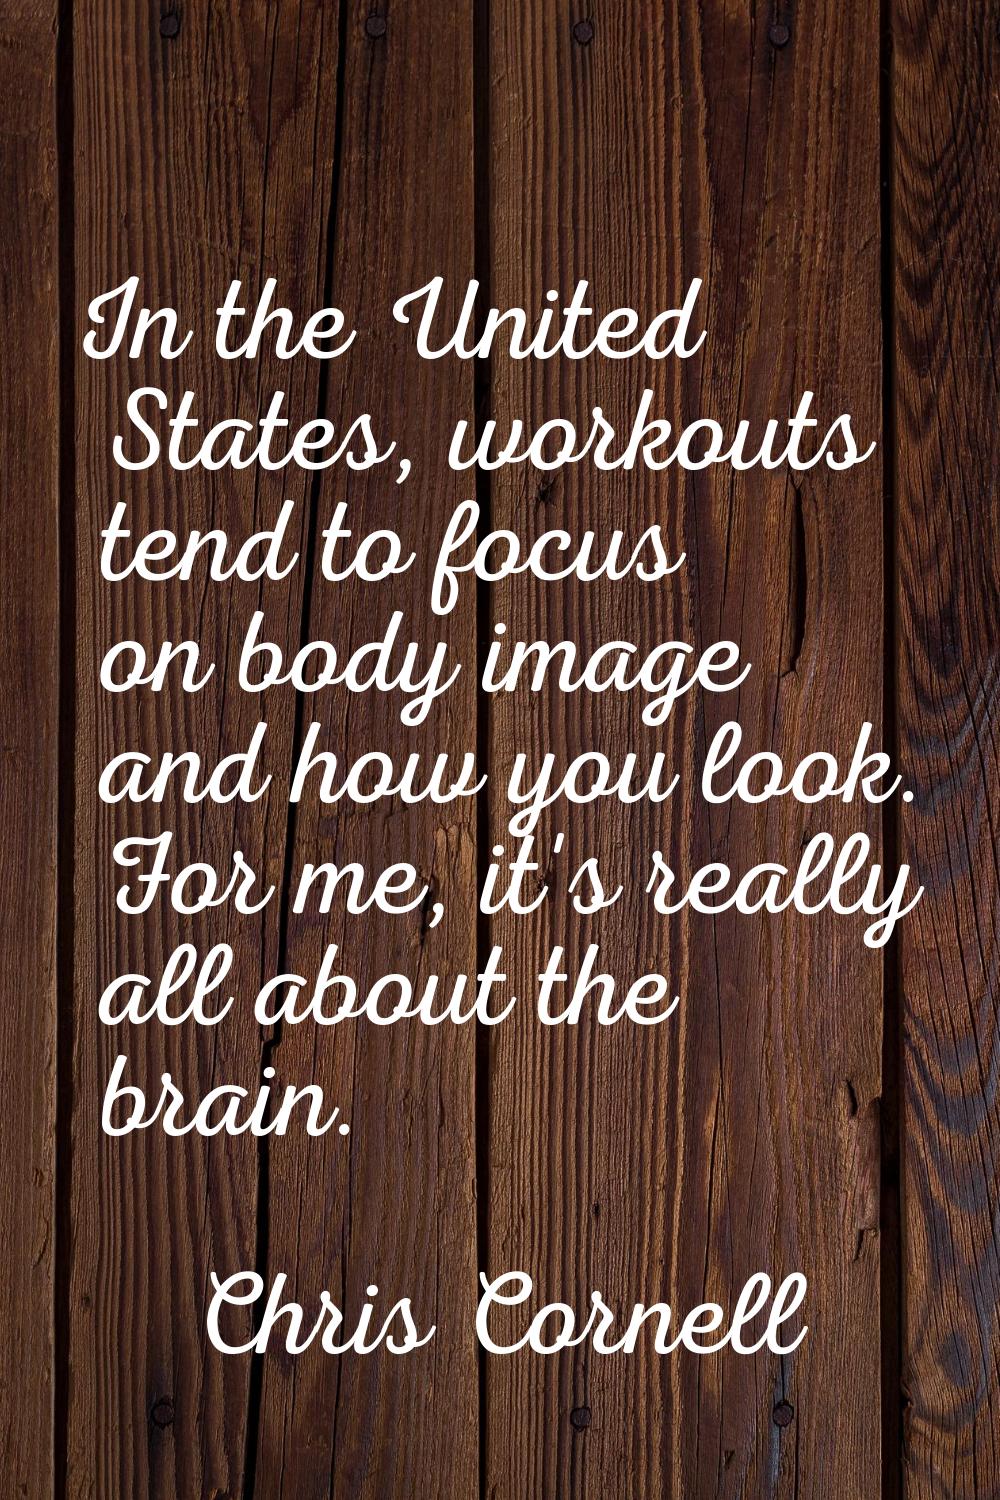 In the United States, workouts tend to focus on body image and how you look. For me, it's really al